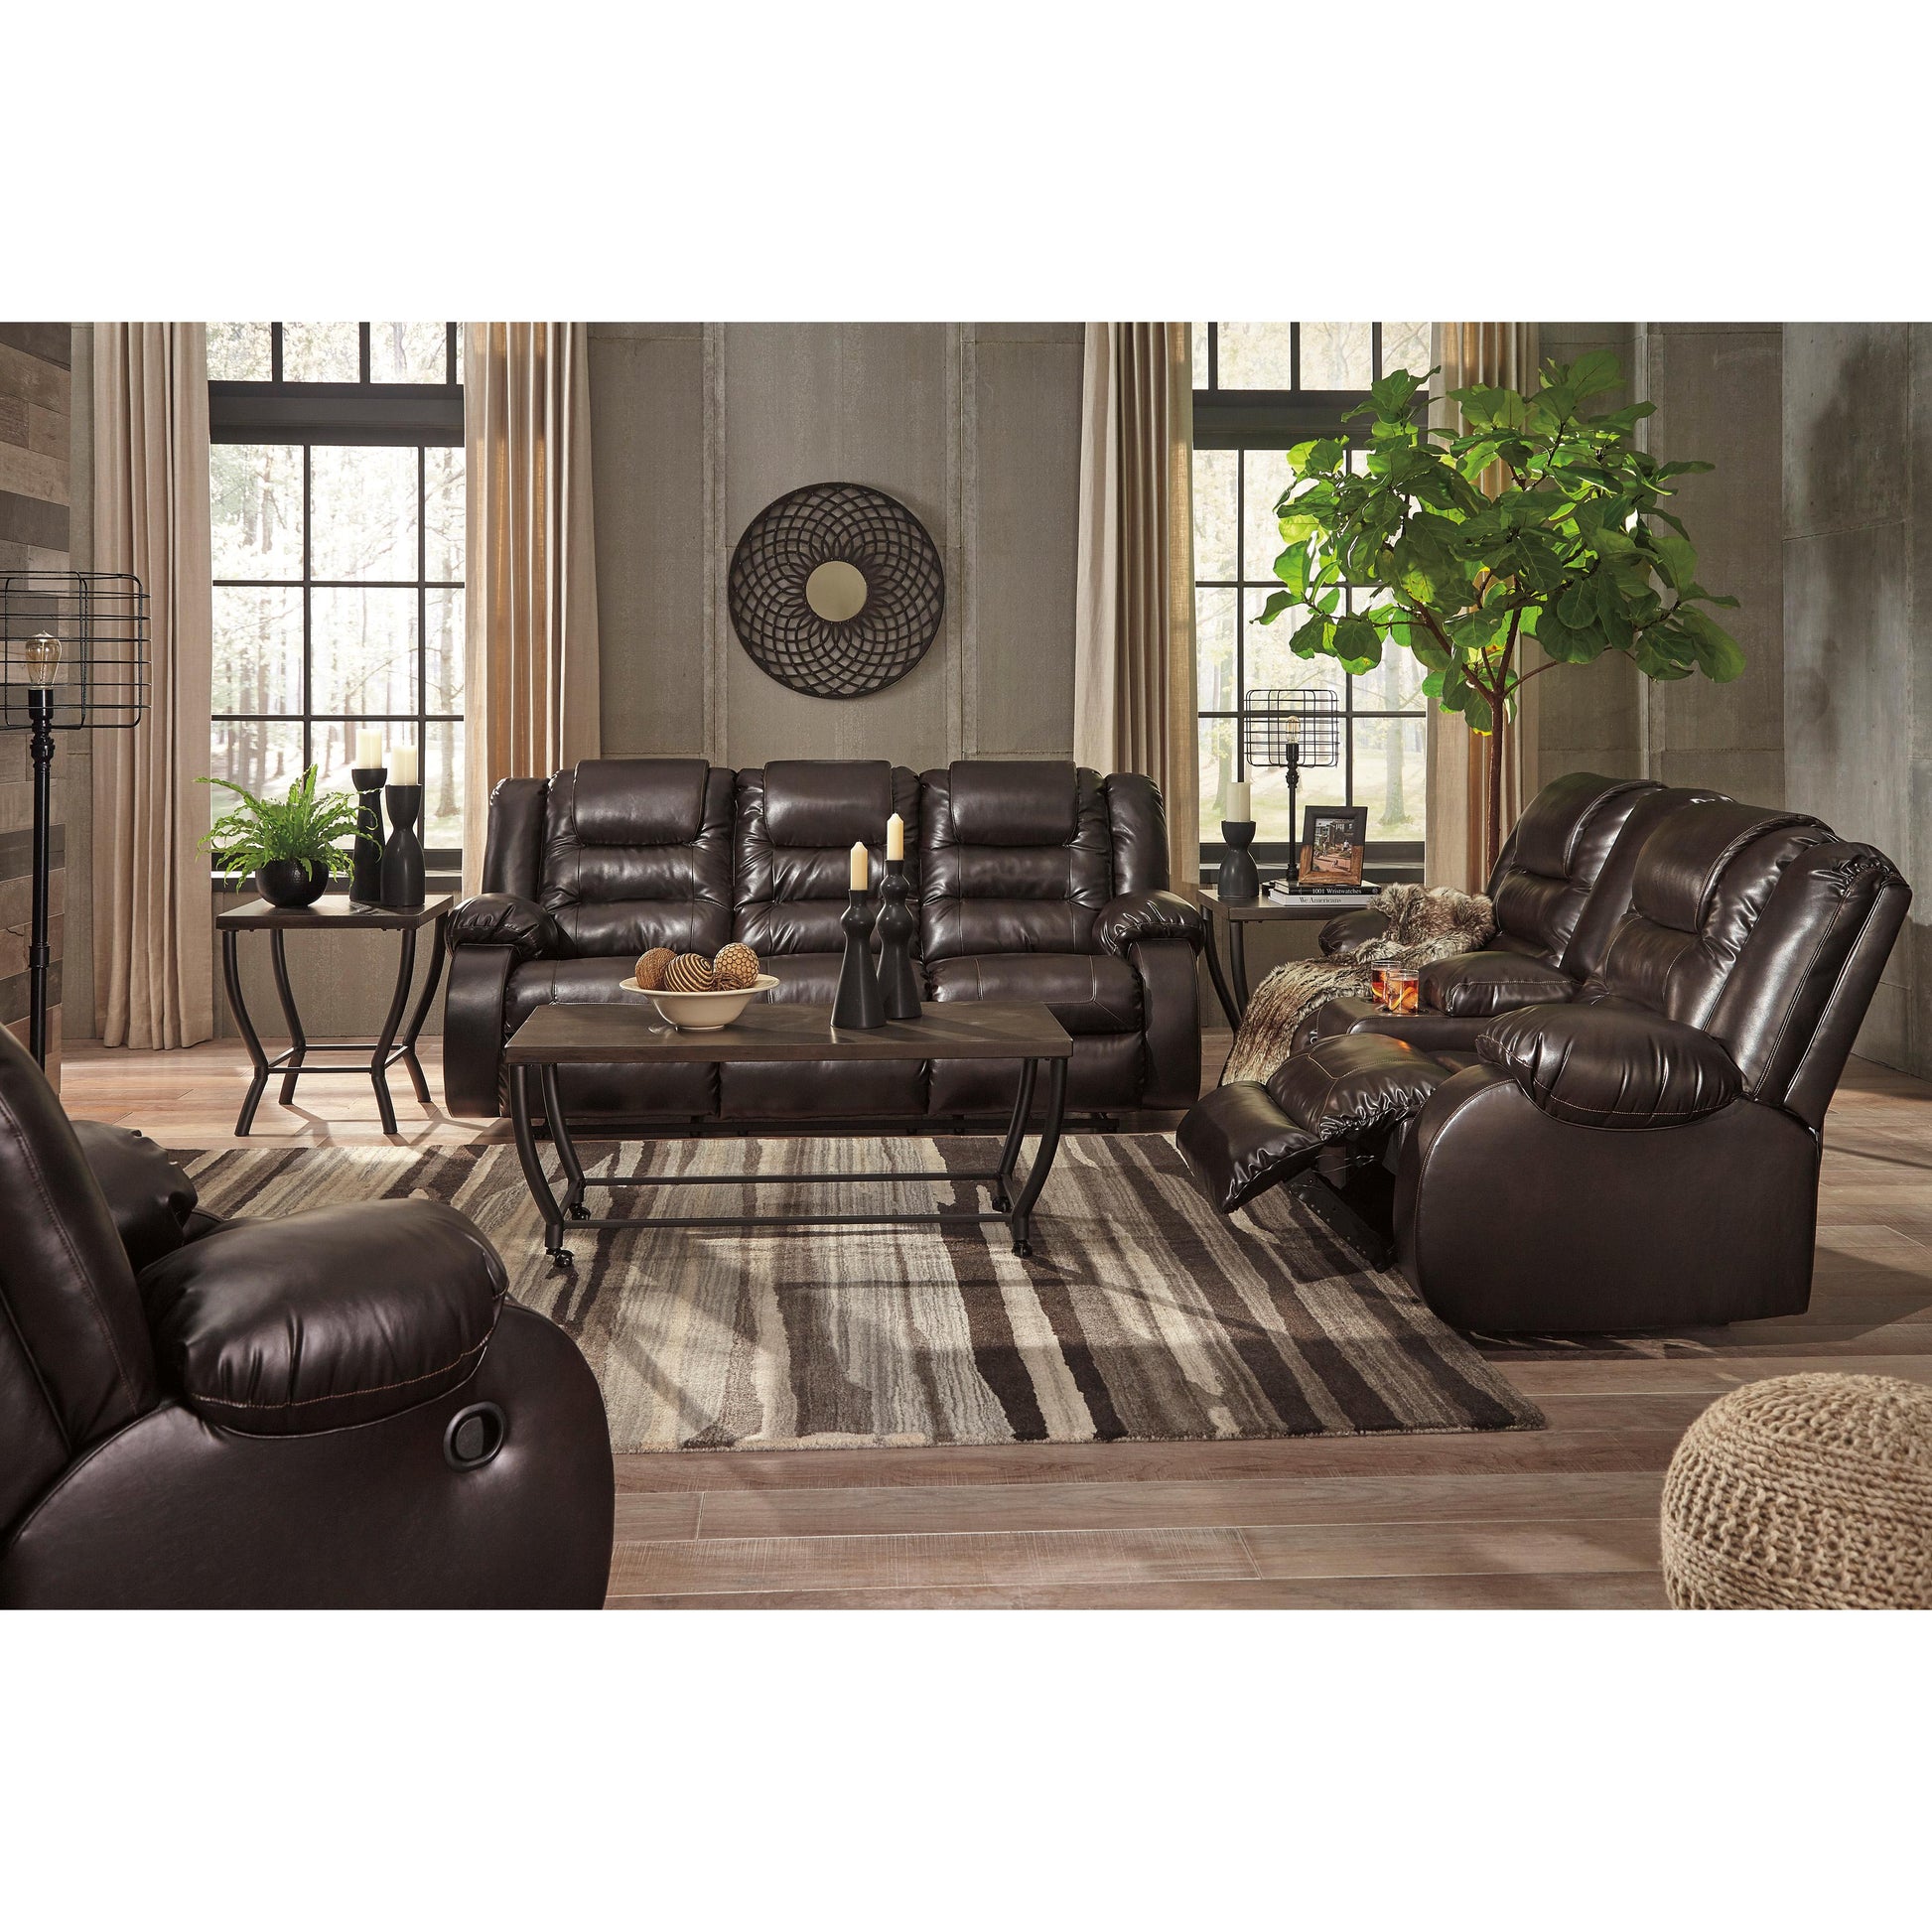 Signature Design by Ashley Vacherie Reclining Leather Look Sofa 7930788